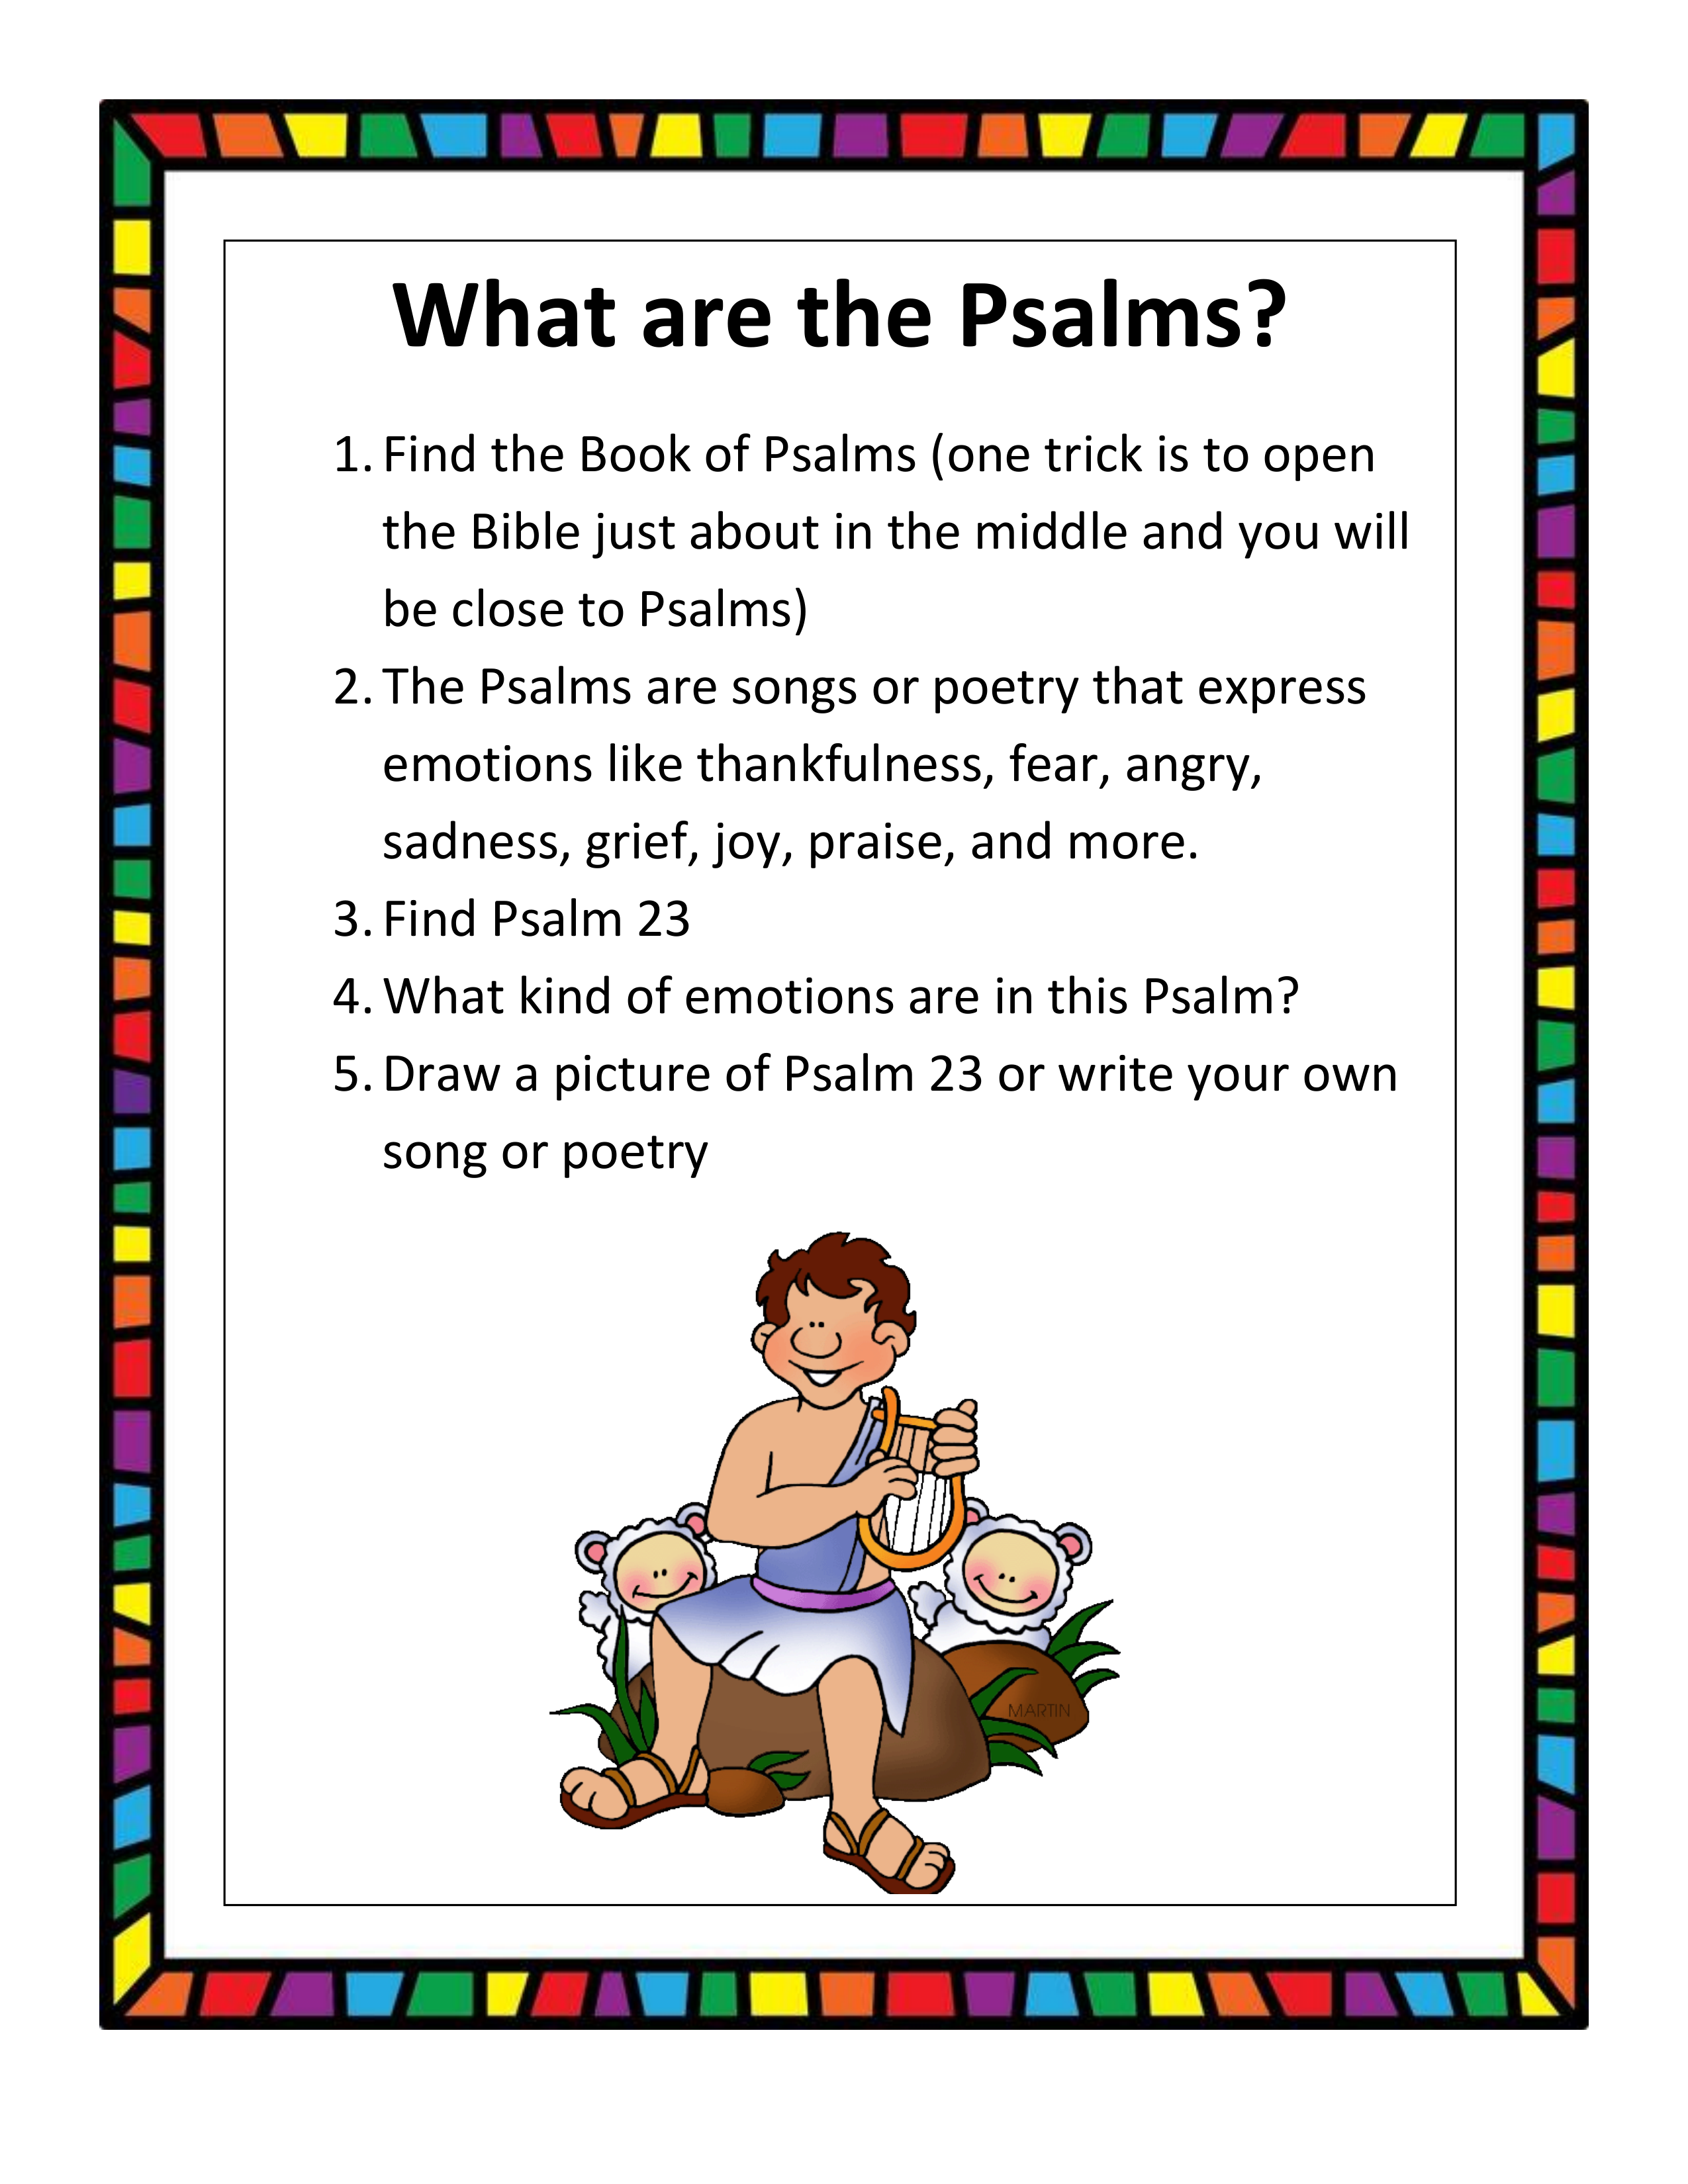 Information sheet to learn about the Psalms